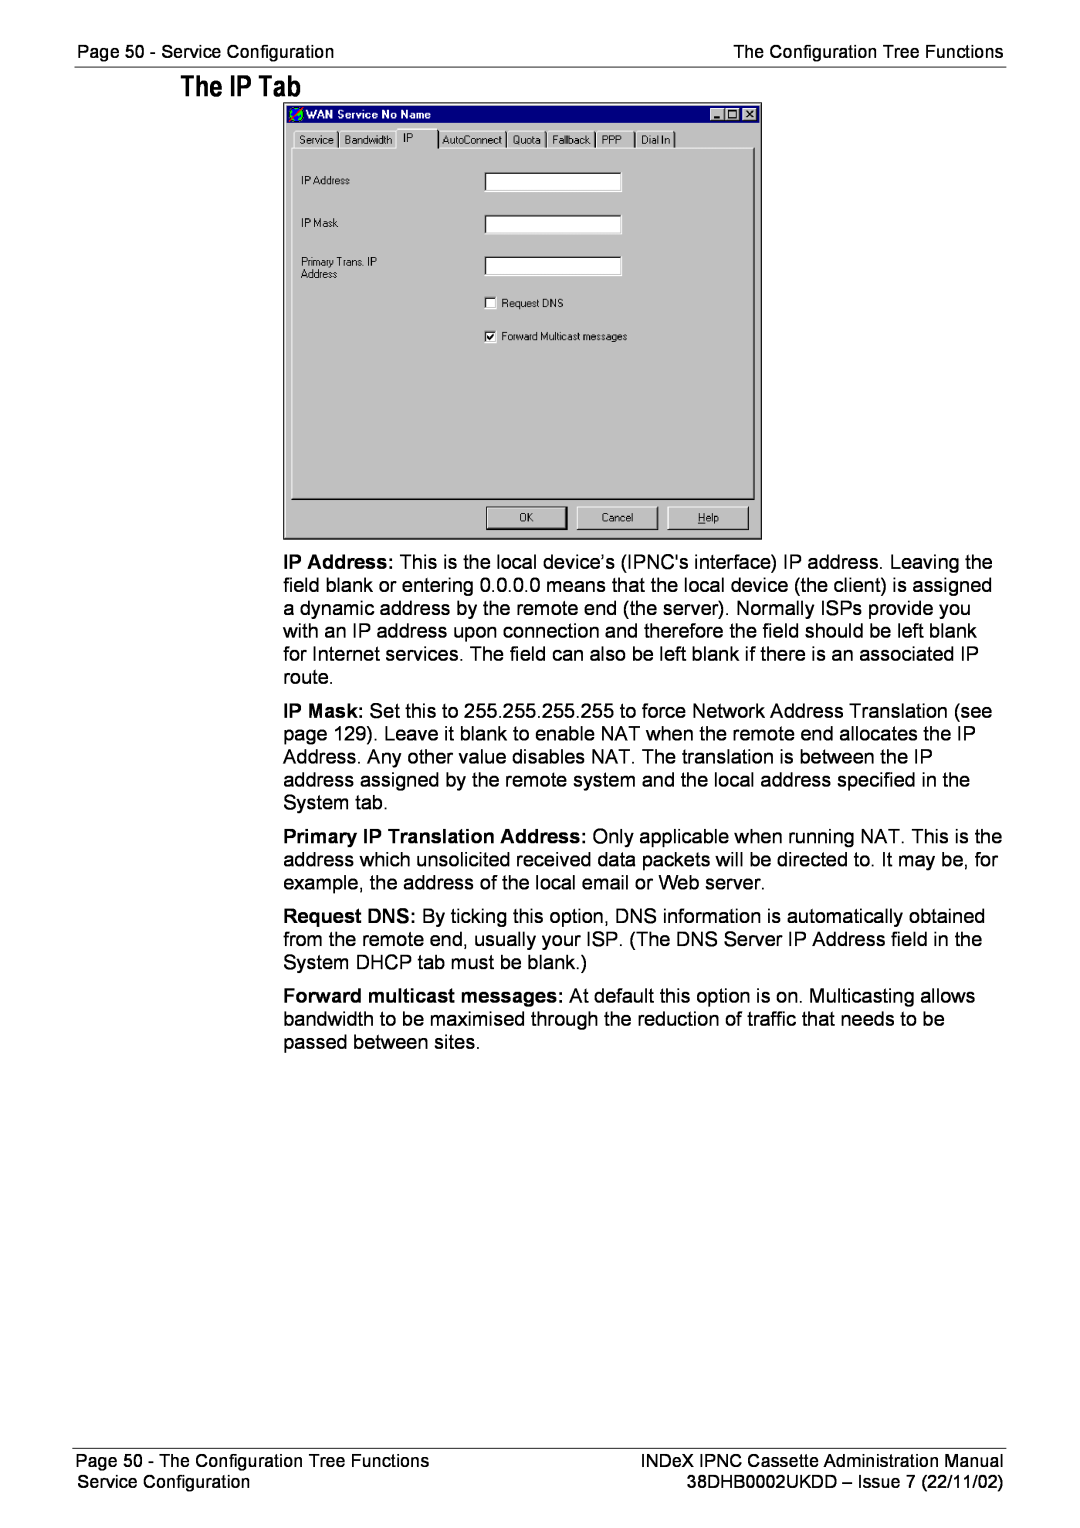 Avaya 38DHB0002UKDD manual The IP Tab, Page 50 - Service Configuration, The Configuration Tree Functions 